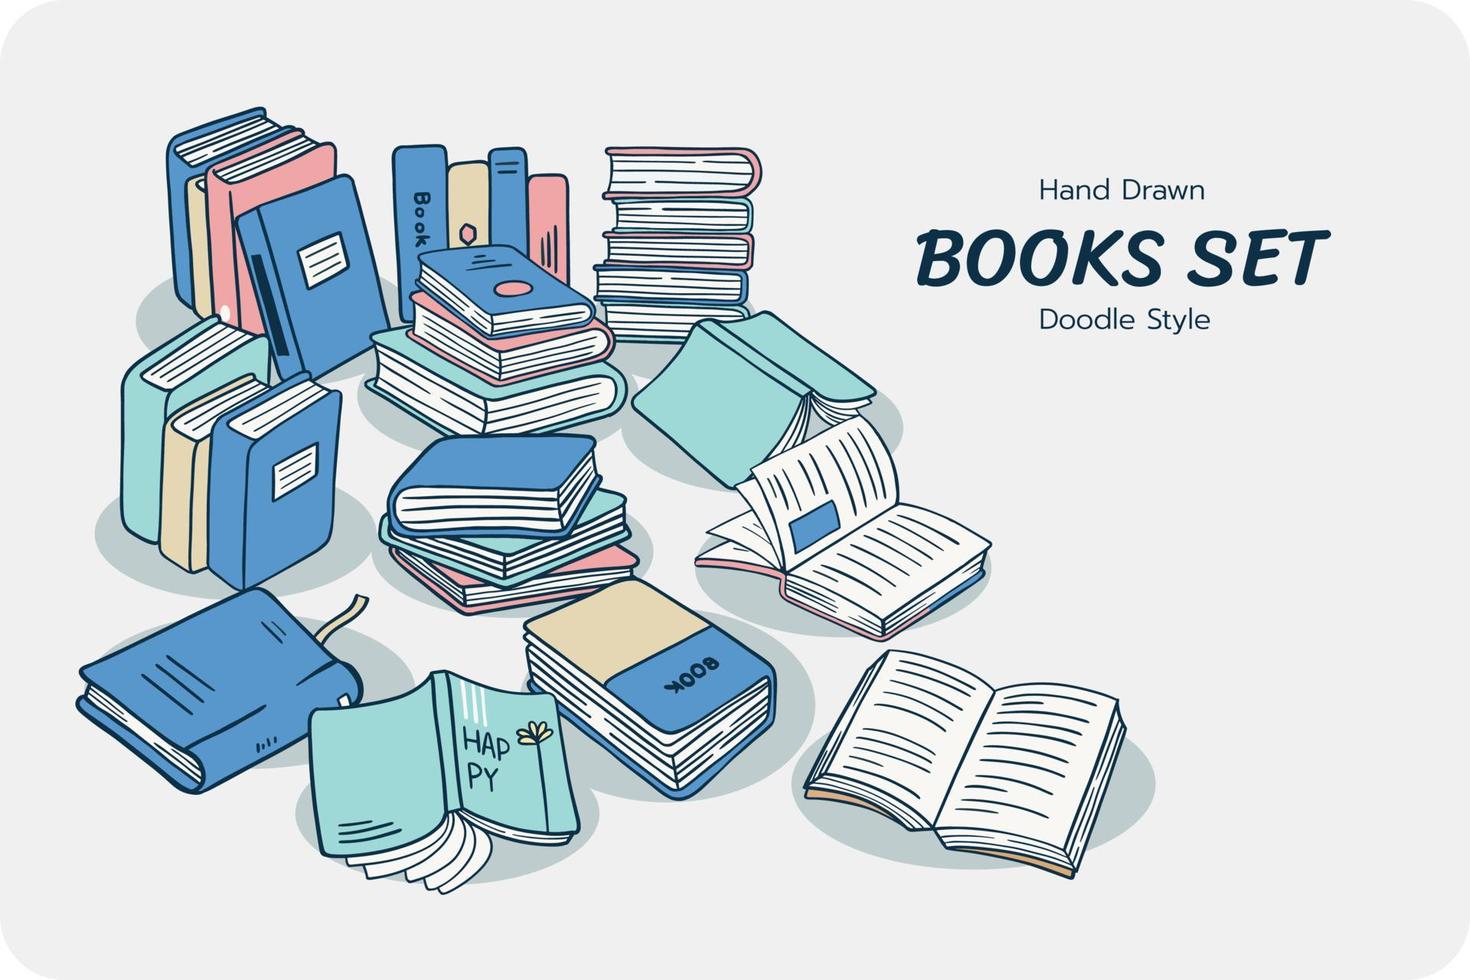 Hand drawn books set, doodle style, set of book in flat design style. vector